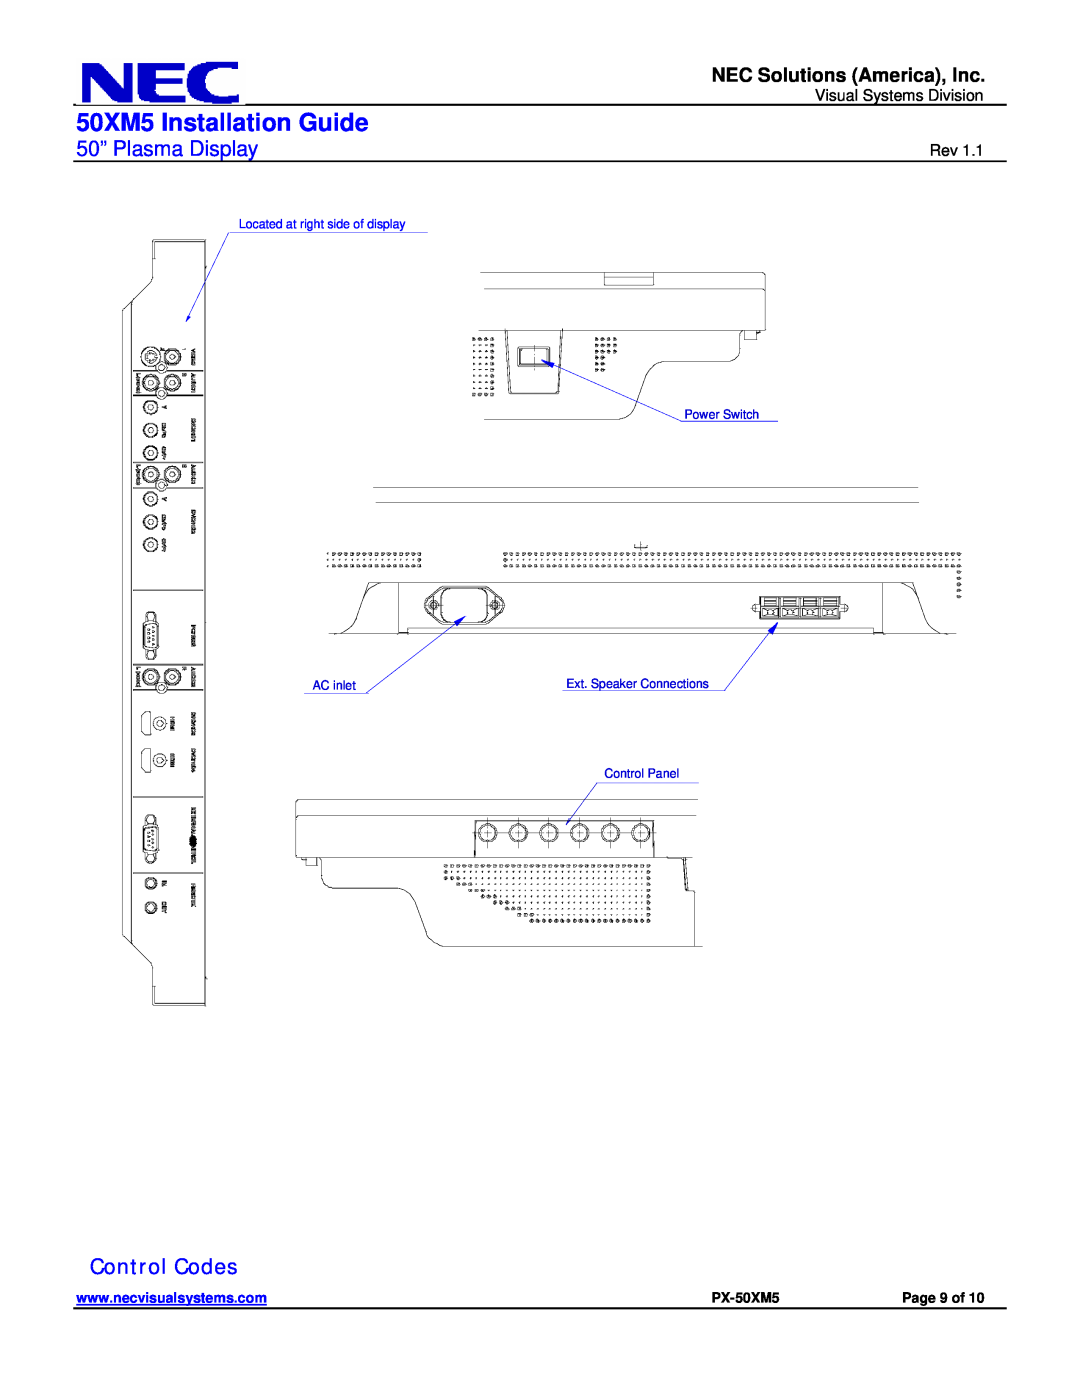 NEC Control Codes, 50XM5 Installation Guide, 50” Plasma Display, NEC Solutions America, Inc, PX-50XM5, Page 9 of 